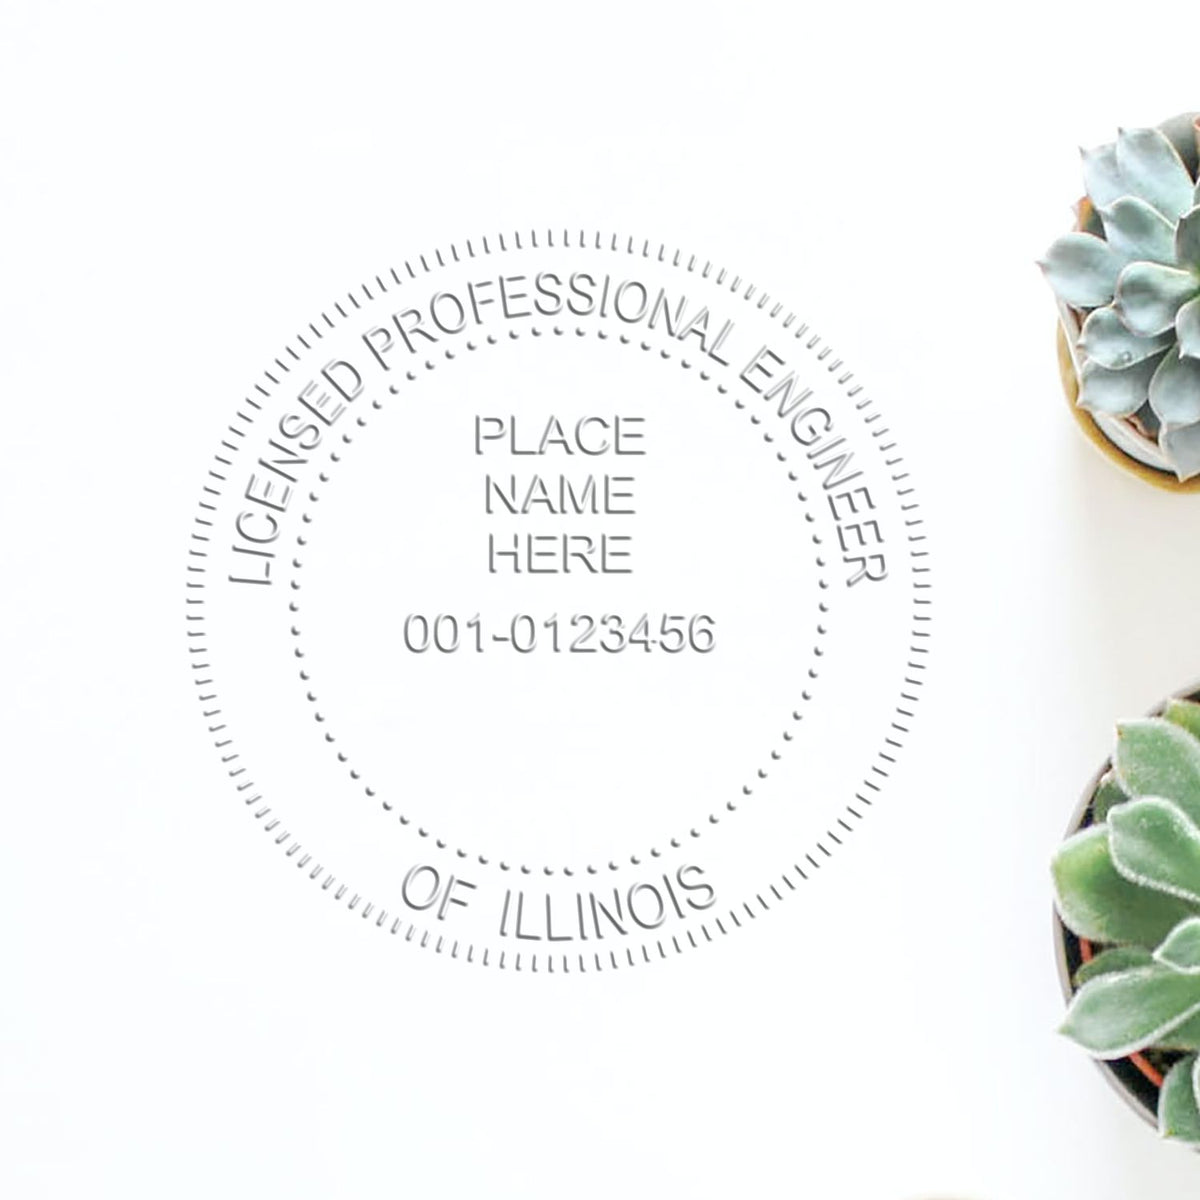 A stamped impression of the Illinois Engineer Desk Seal in this stylish lifestyle photo, setting the tone for a unique and personalized product.